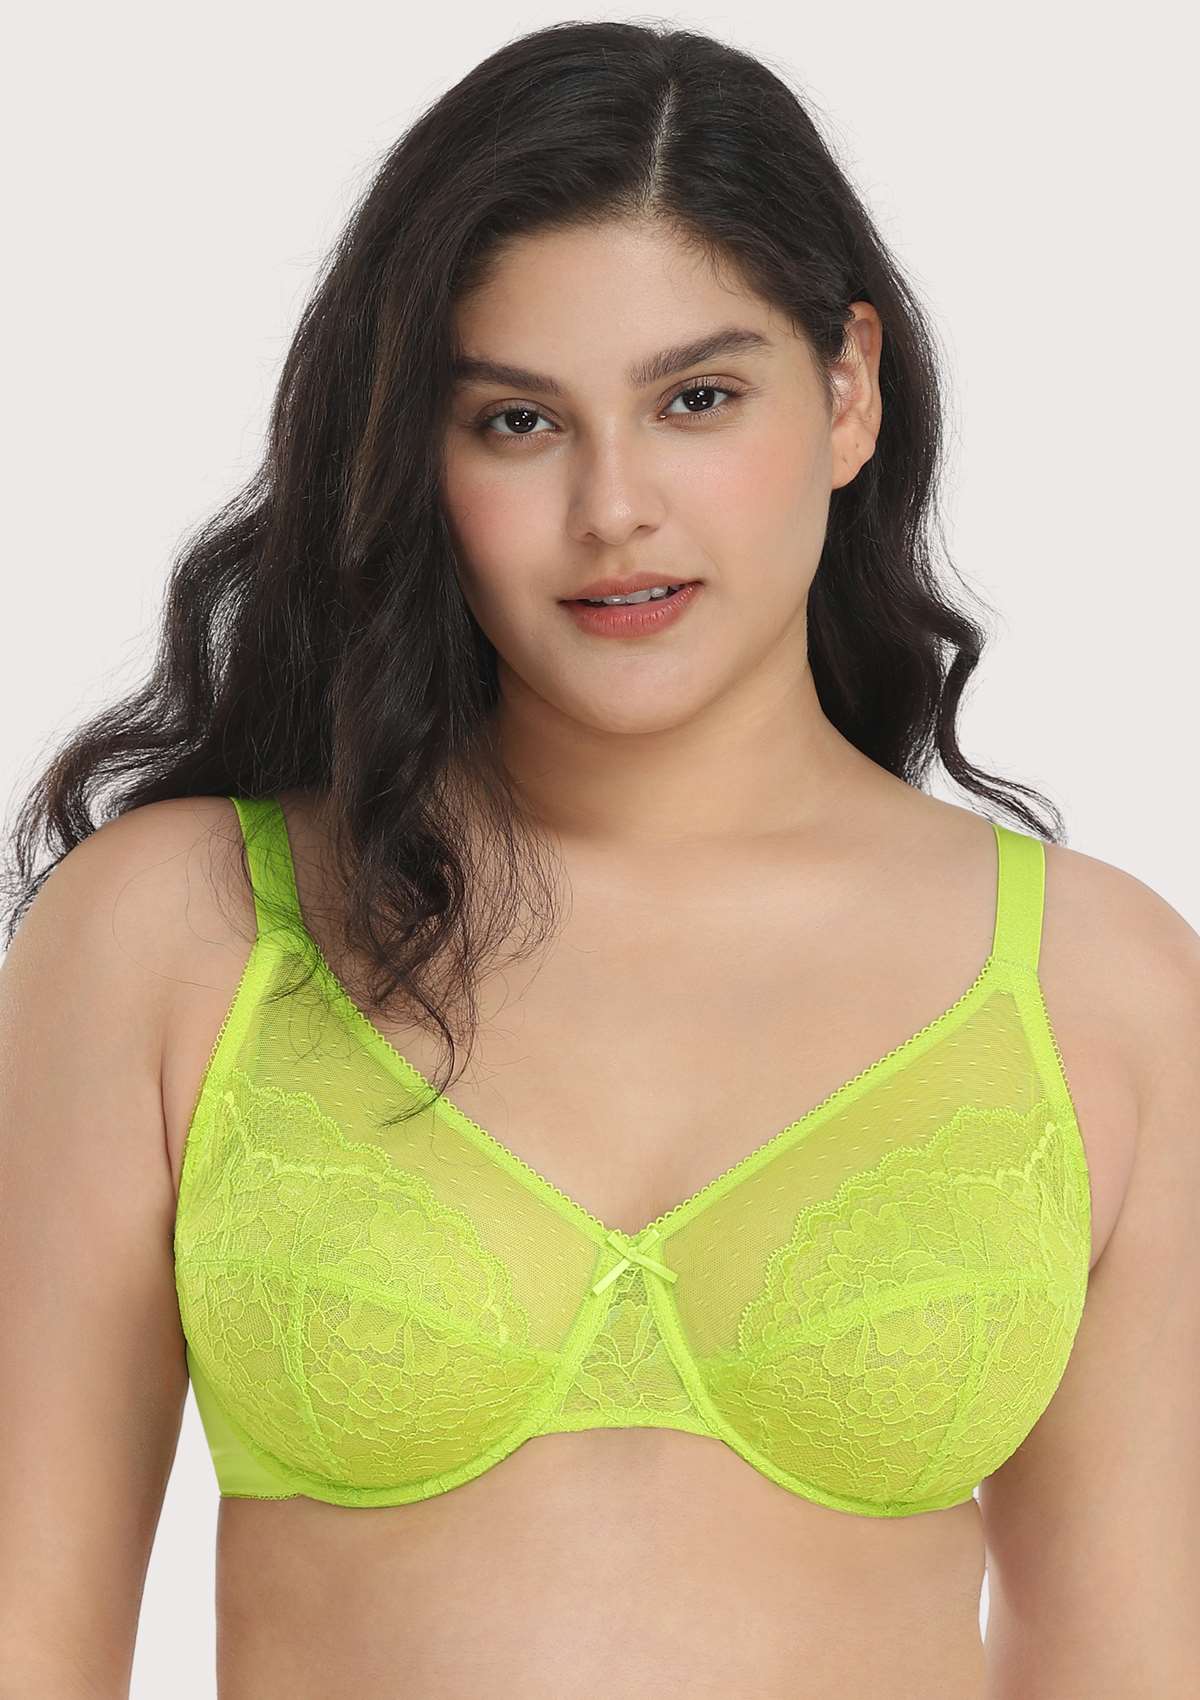 HSIA Enchante Full Cup Minimizing Bra: Supportive Unlined Lace Bra - Lime Green / 34 / G